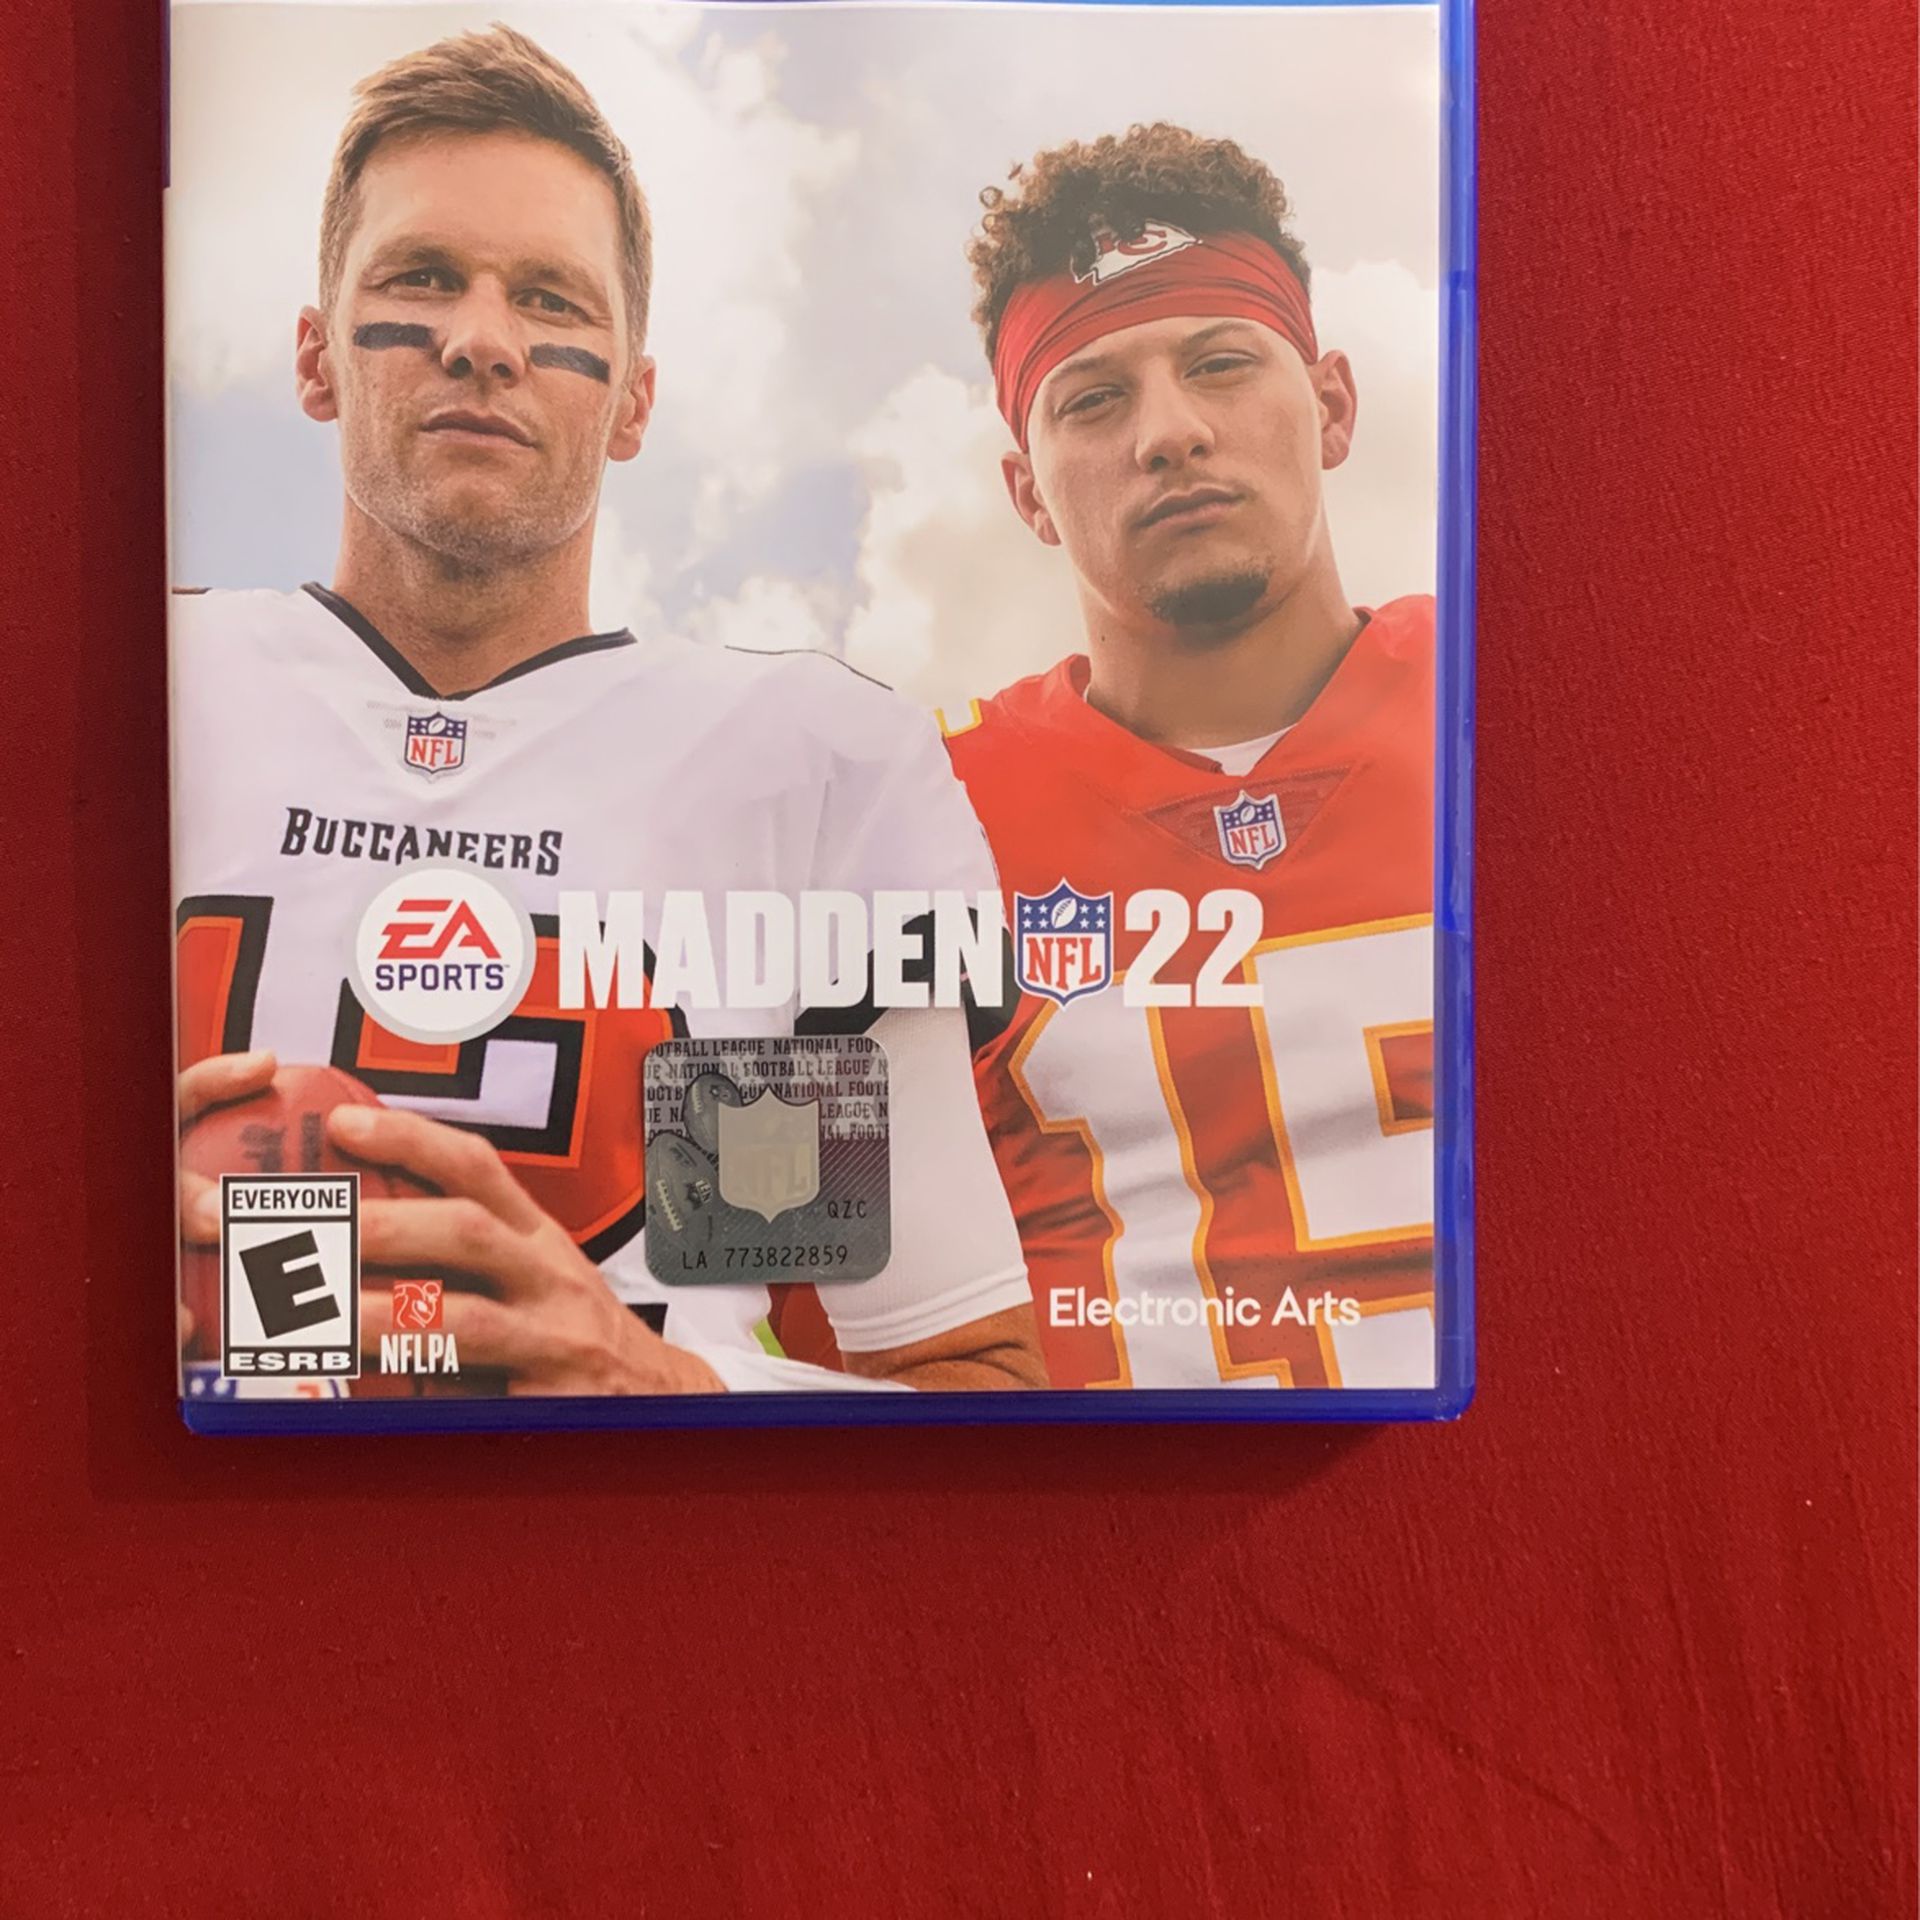 madden 22 leagues ps4